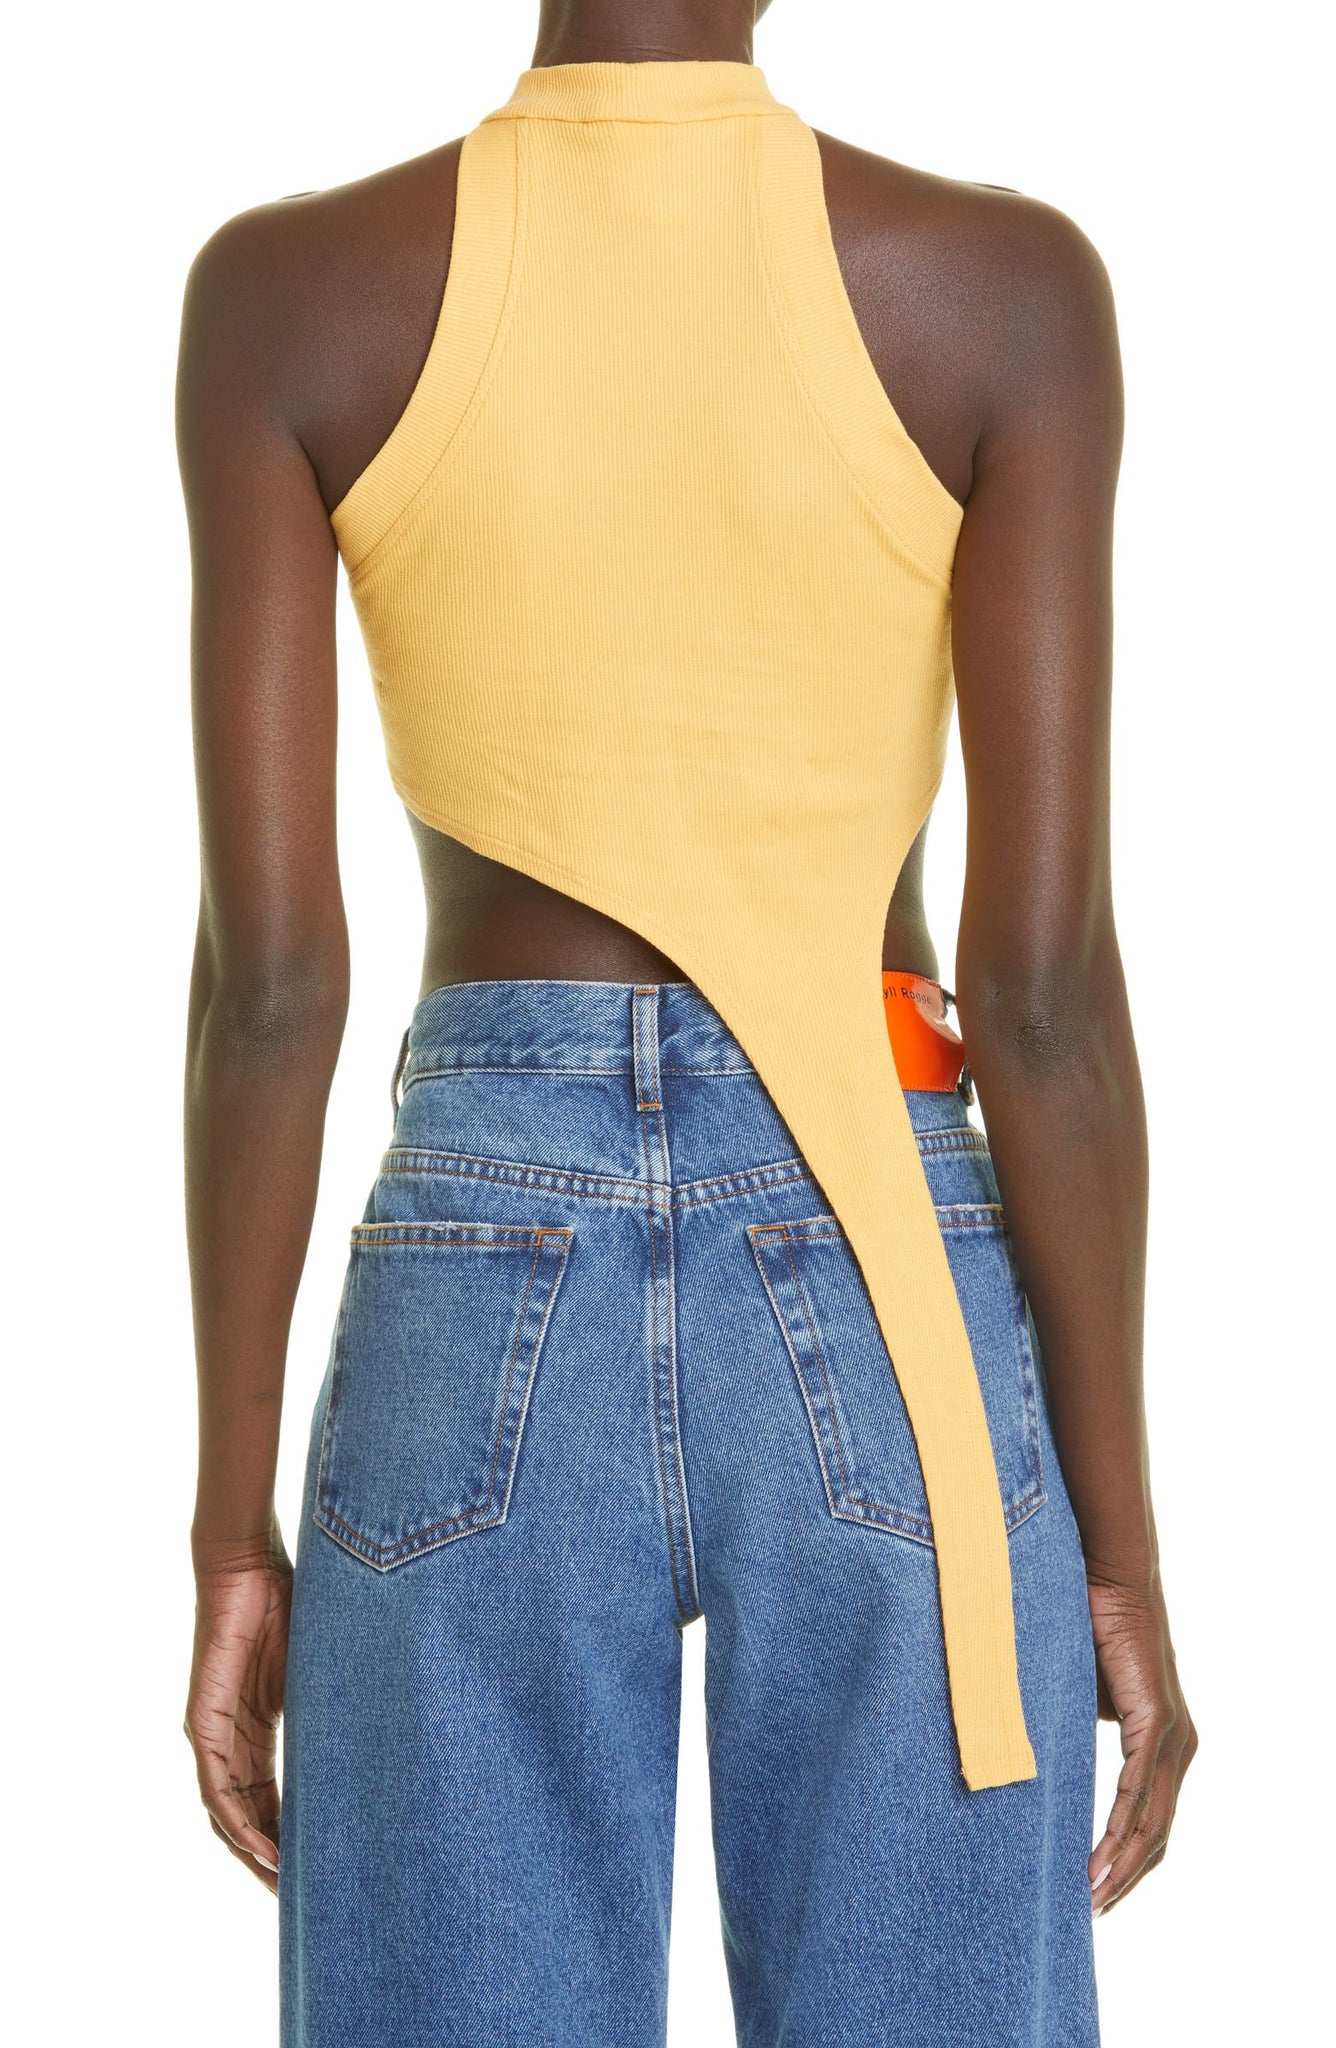 Ocre "Race Her" Ribbed Halter Tank